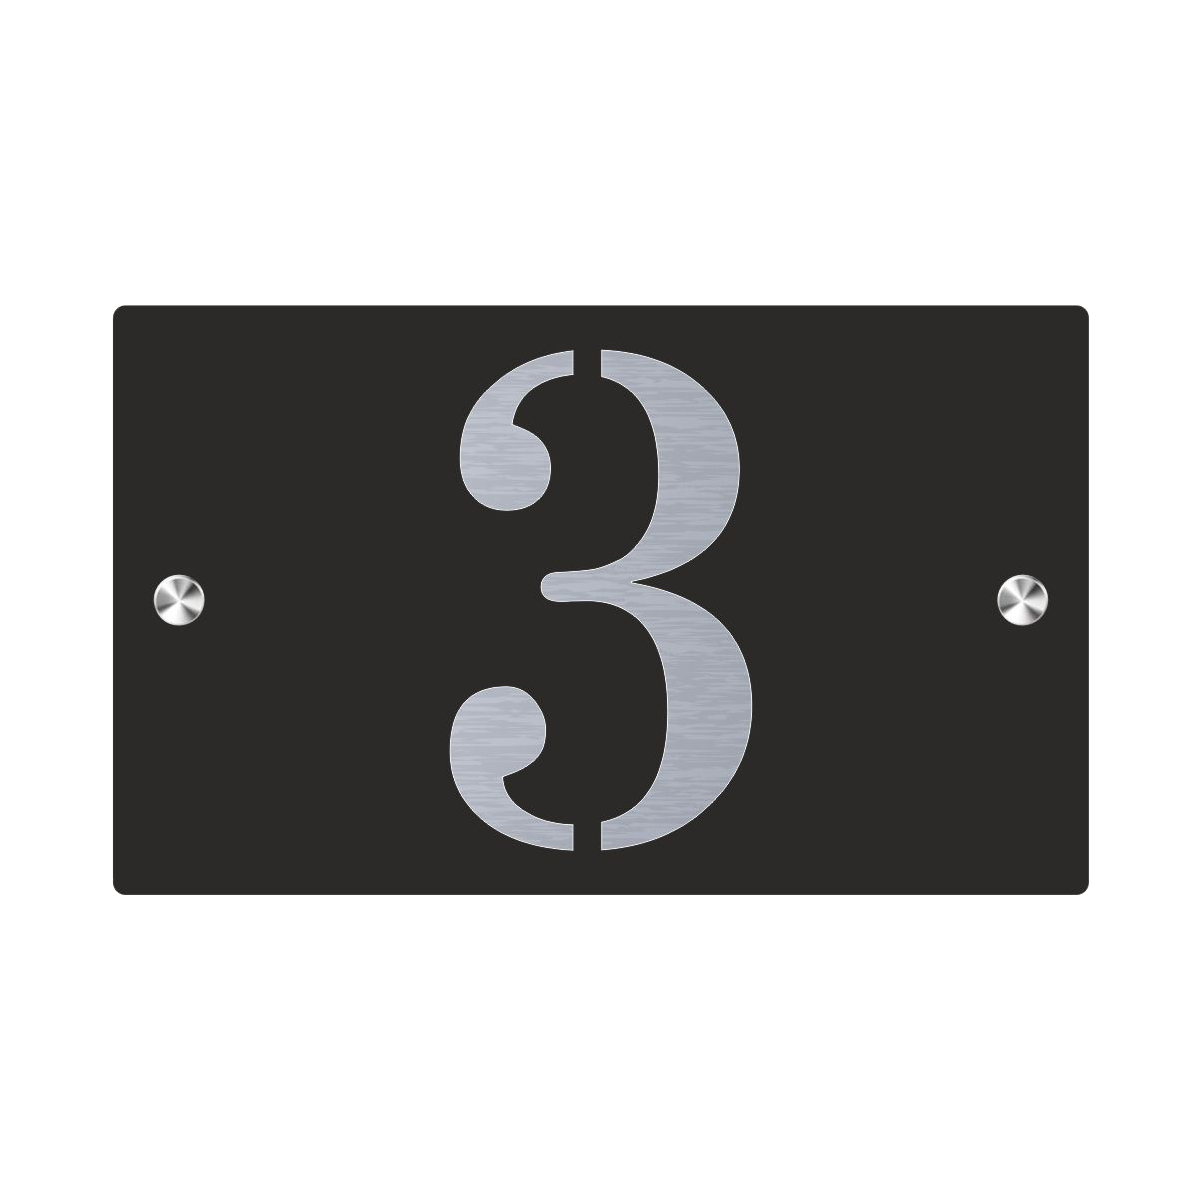 Premium S1 Mini Personalized Street Sign and House Number Black Steel Background 